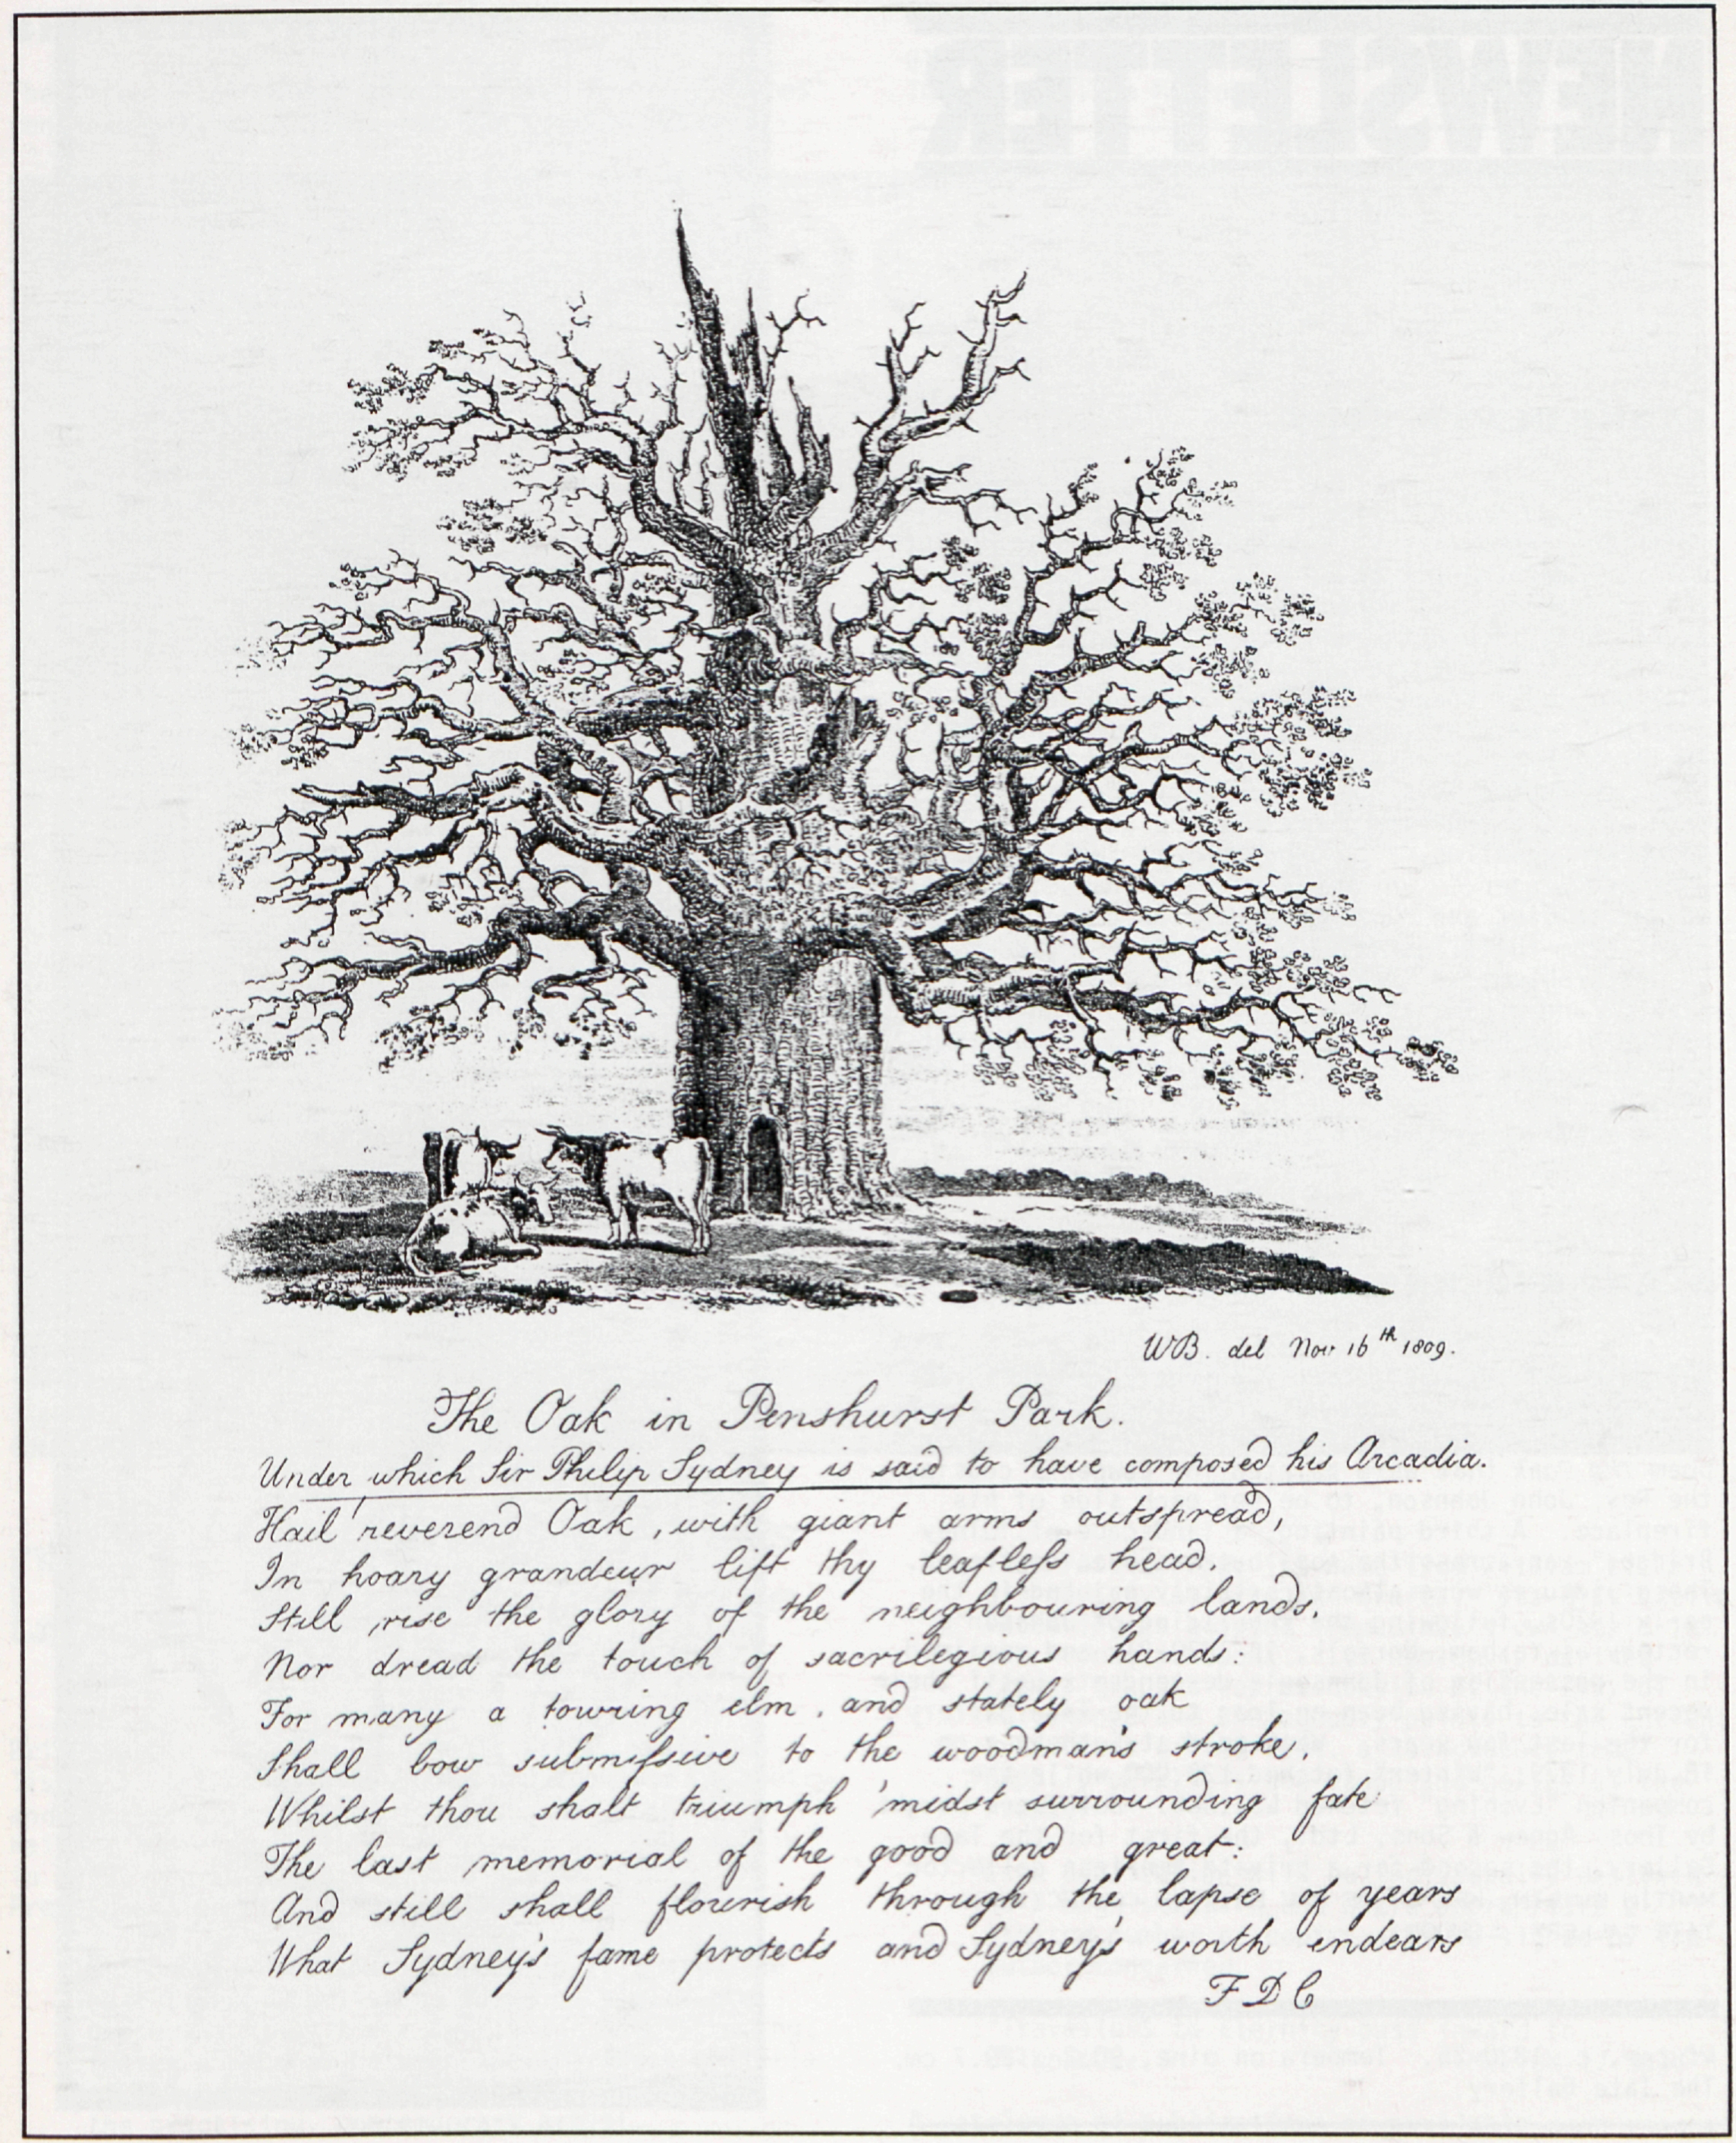 WB. del Nov 16.th 1809.
			
			The Oak in Penshurst Park.
			
			Under which Sir Philip Sydney is said to have composed his Arcadia.
			
			Hail! reverend Oak, with giant arms outspread,
			In hoary grandeur lift thy leafless head,
			Still rise the glory of the neighbouring lands,
			Nor dread the touch of sacrilegious hands:
			For many a towring elm, and stately oak
			Shall bow submissive to the woodman’s stroke,
			Whilst thou shalt triumph ’midst surrounding fate
			The last memorial of the good and great:
			And still shall flourish through the lapse of years
			What Sydney’s fame protects and Sydney’s worth endears
			
			F D C